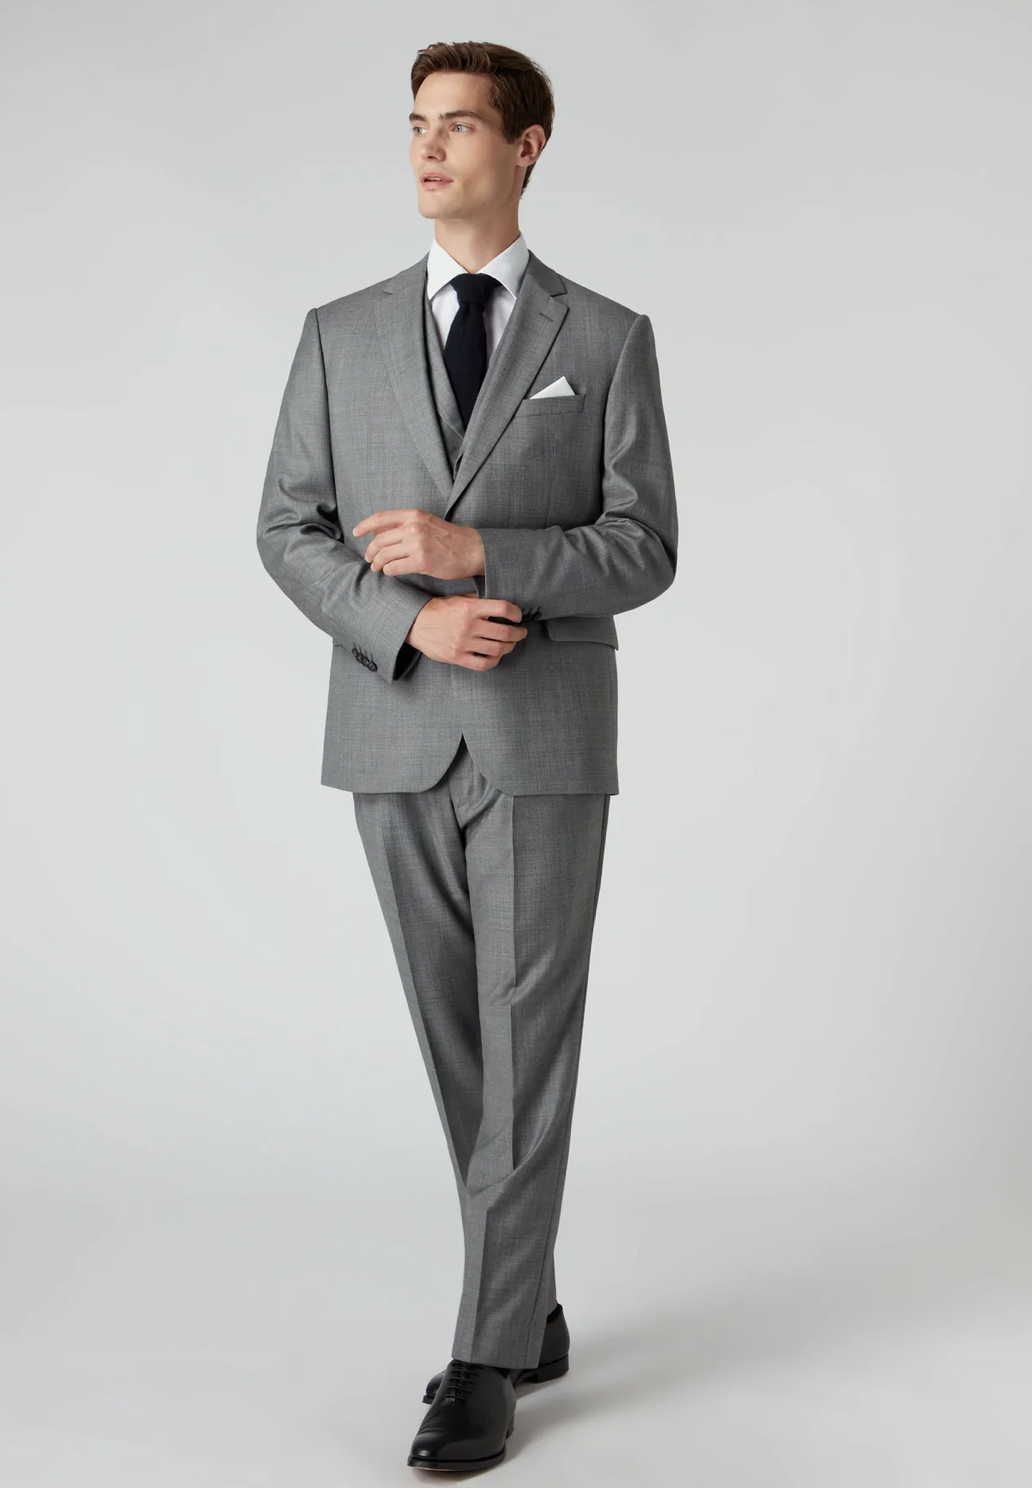 The perfect 3 piece suit for Rehearsal Dinner or Civil Service.